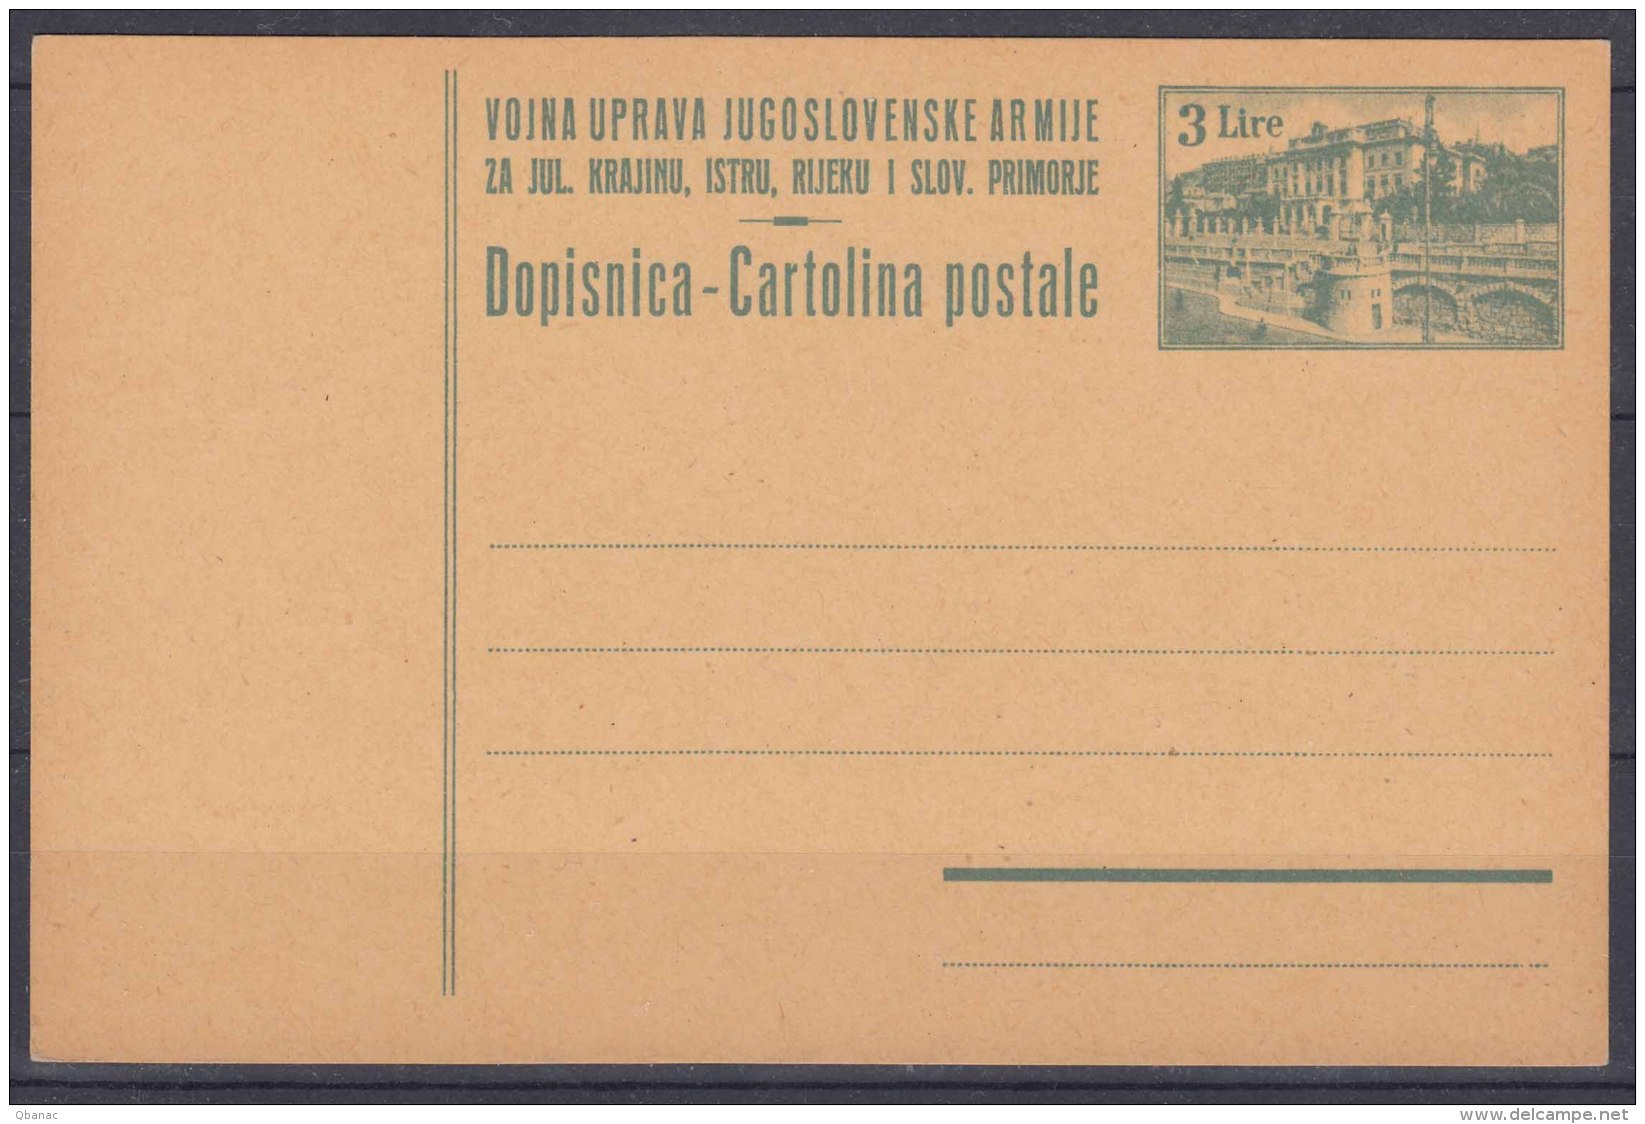 Yugoslavia Occ. Of Italy, Trieste Zone B, Postal Stationery Card In Rare Brown Cardboard Variety, Excellent Mint Cond. - Poststempel